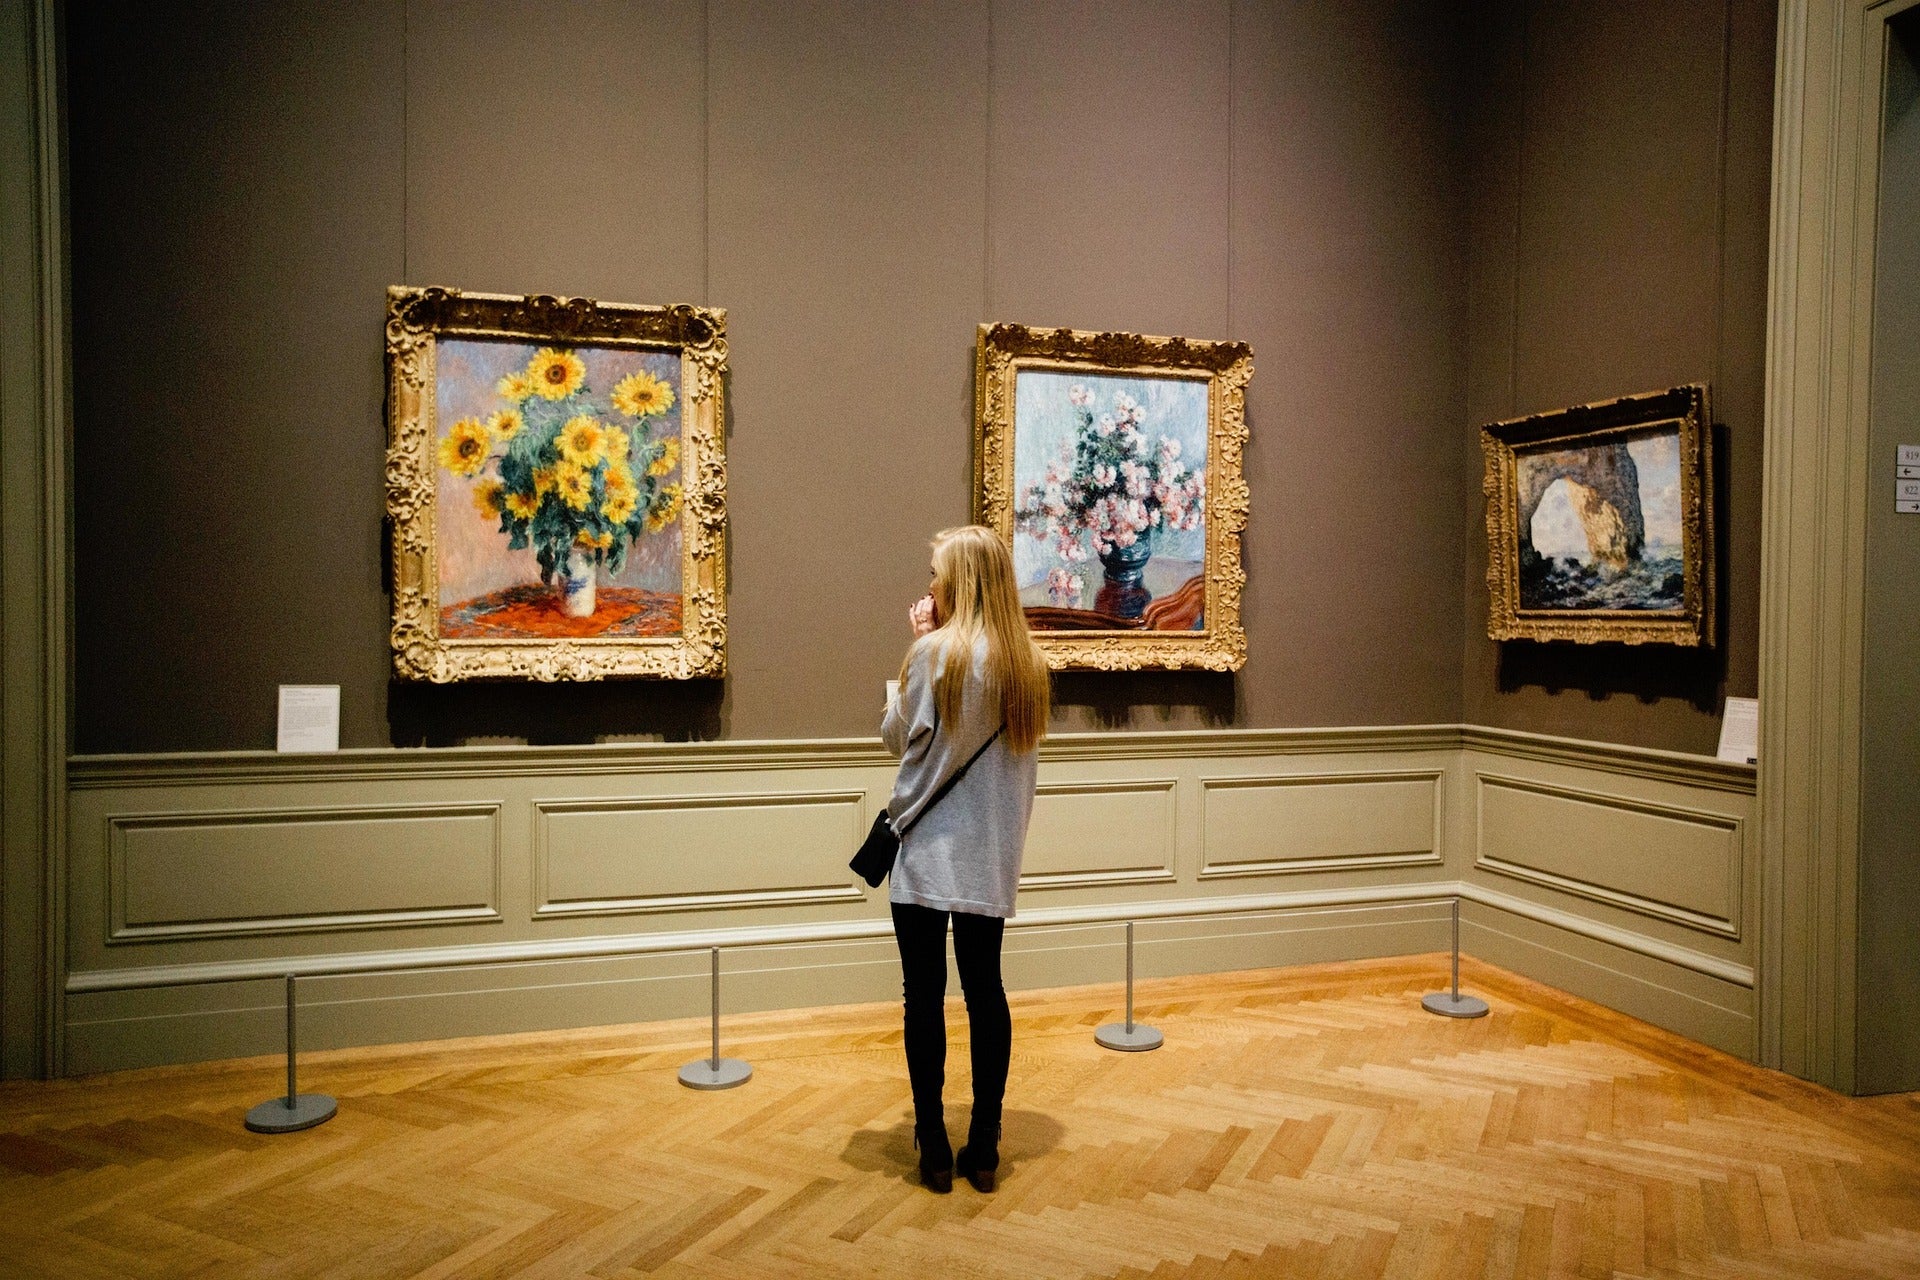 What are the Different Subjects of Art?